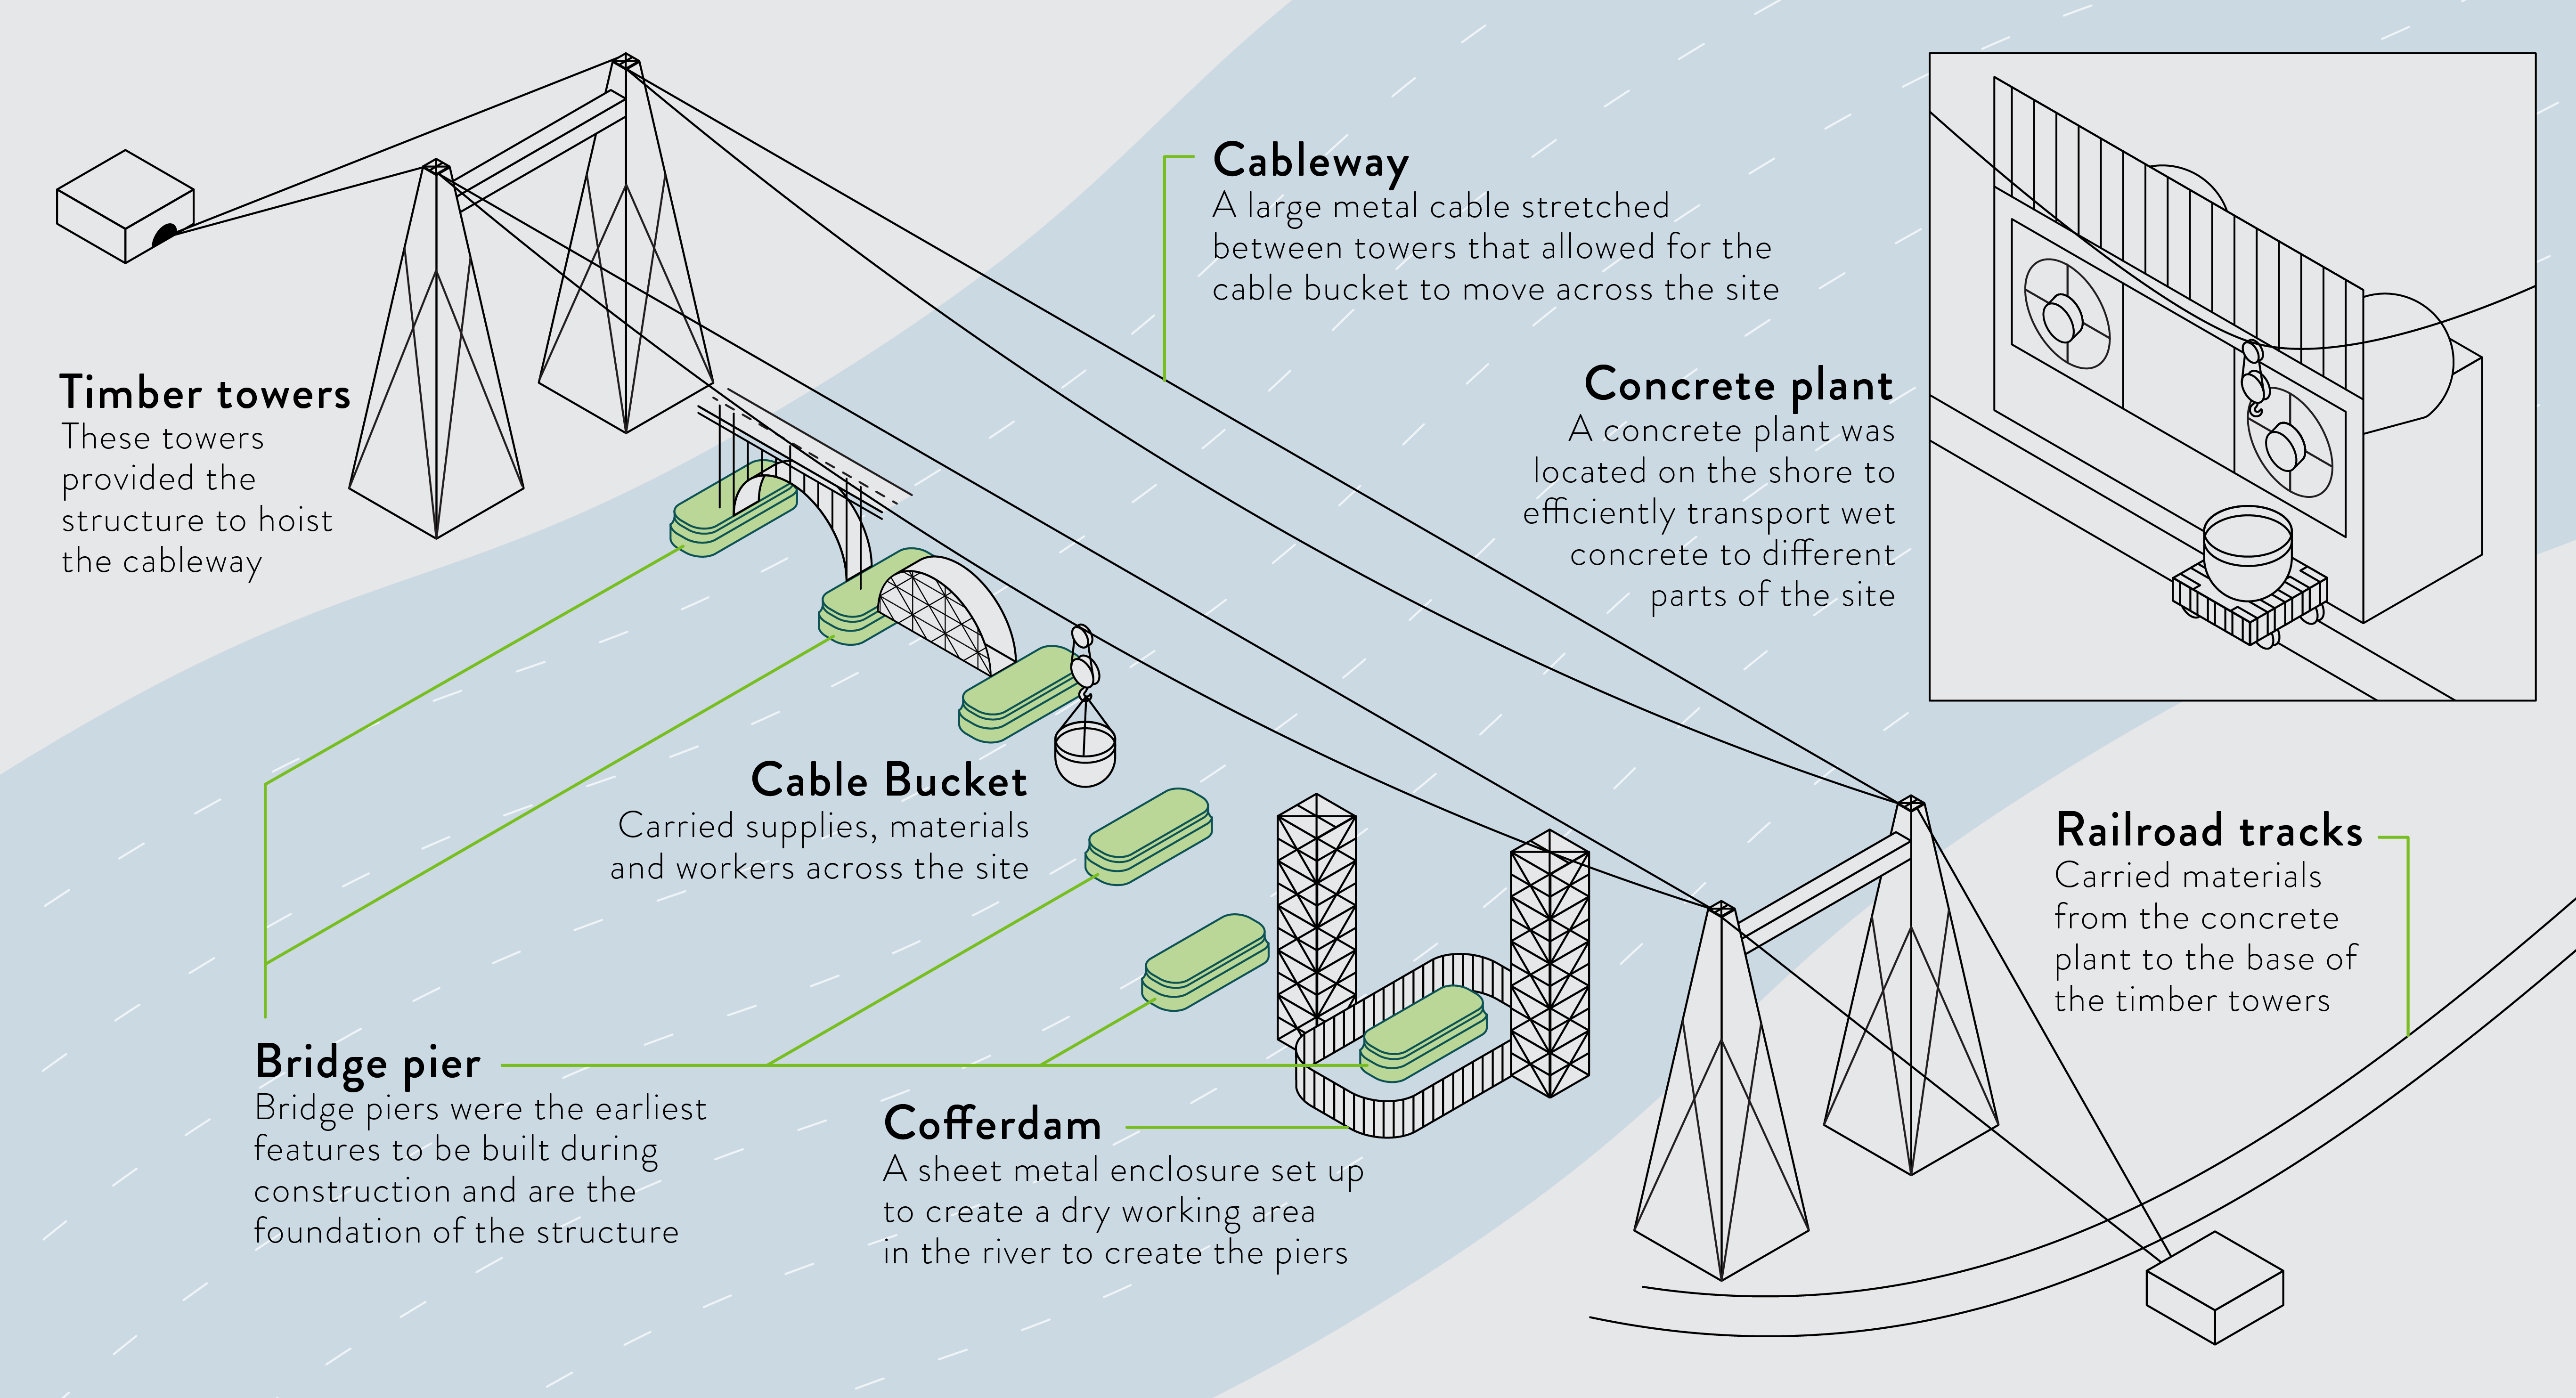 A graphic showing the components of bridge construction, including the timber towers, cableway, cable bucket, bridge piers, cofferdam, and railroad tracks